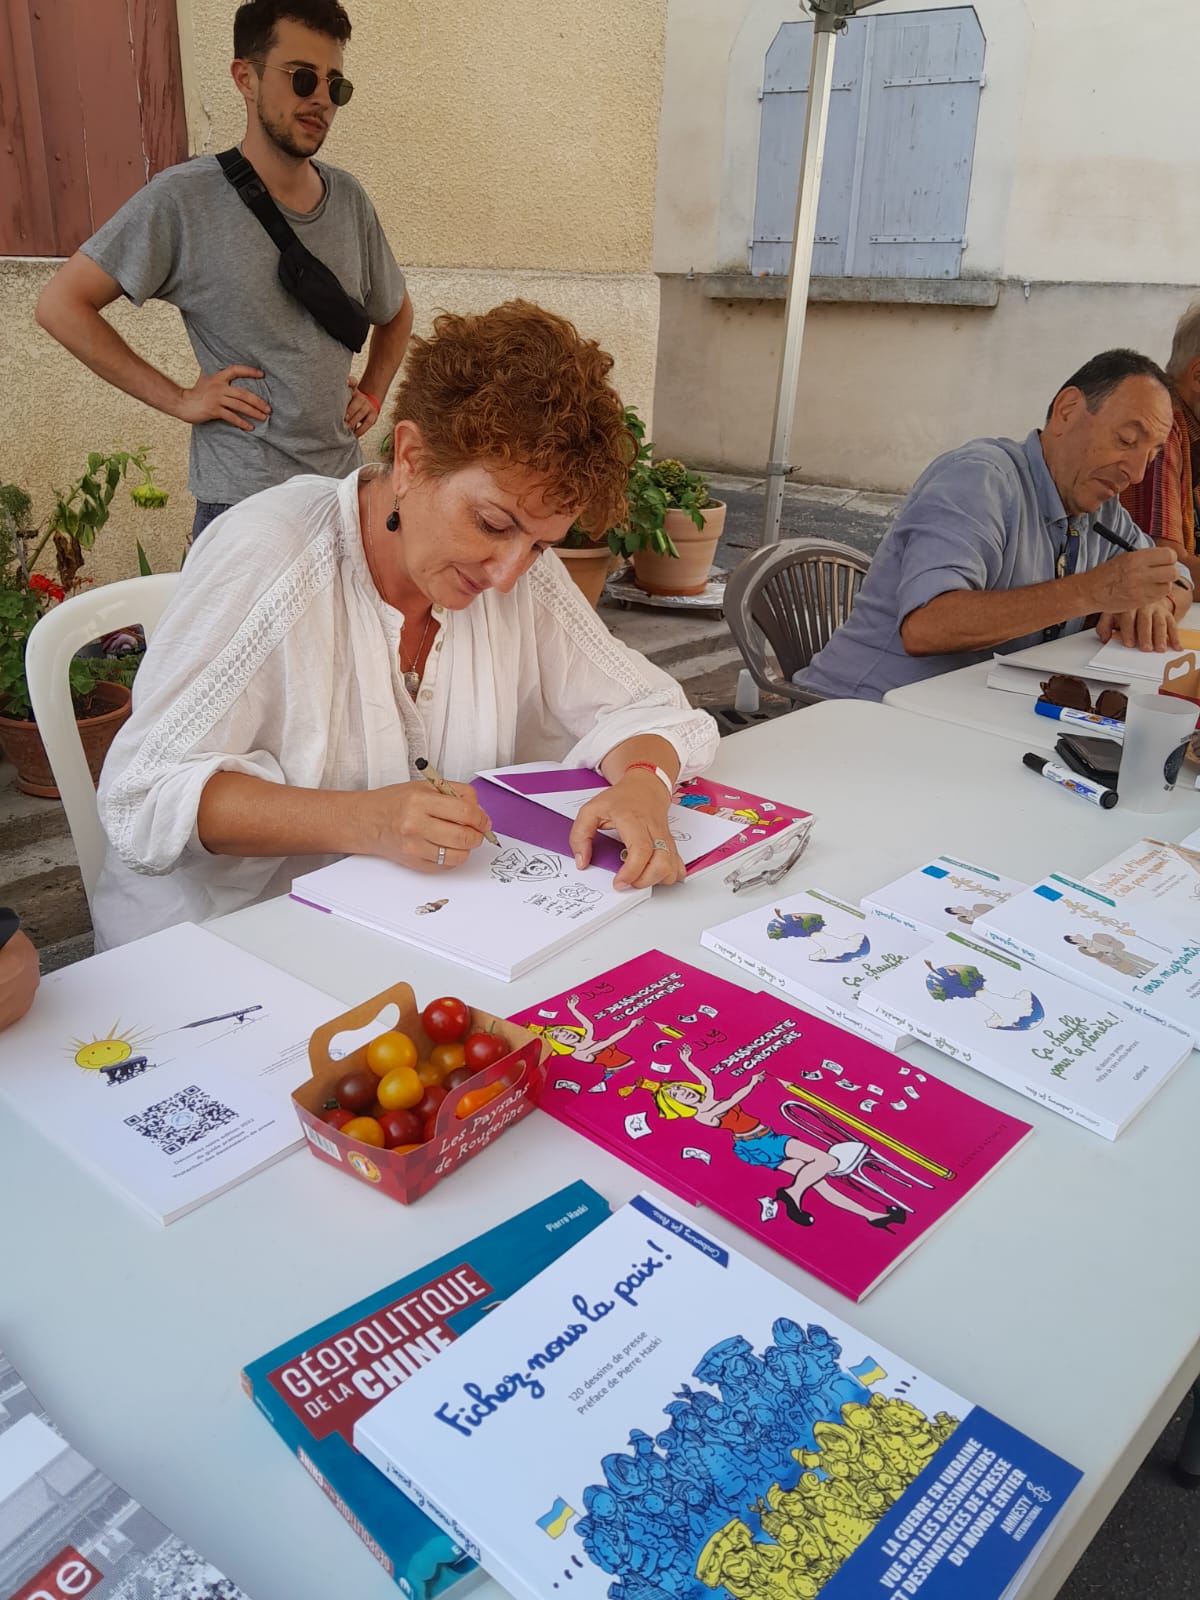 Signing session with the cartoonists and Pierre Haski around the book “Fichez-nous la paix!” – Dlog (Tunisia) and Kichka (Israel)